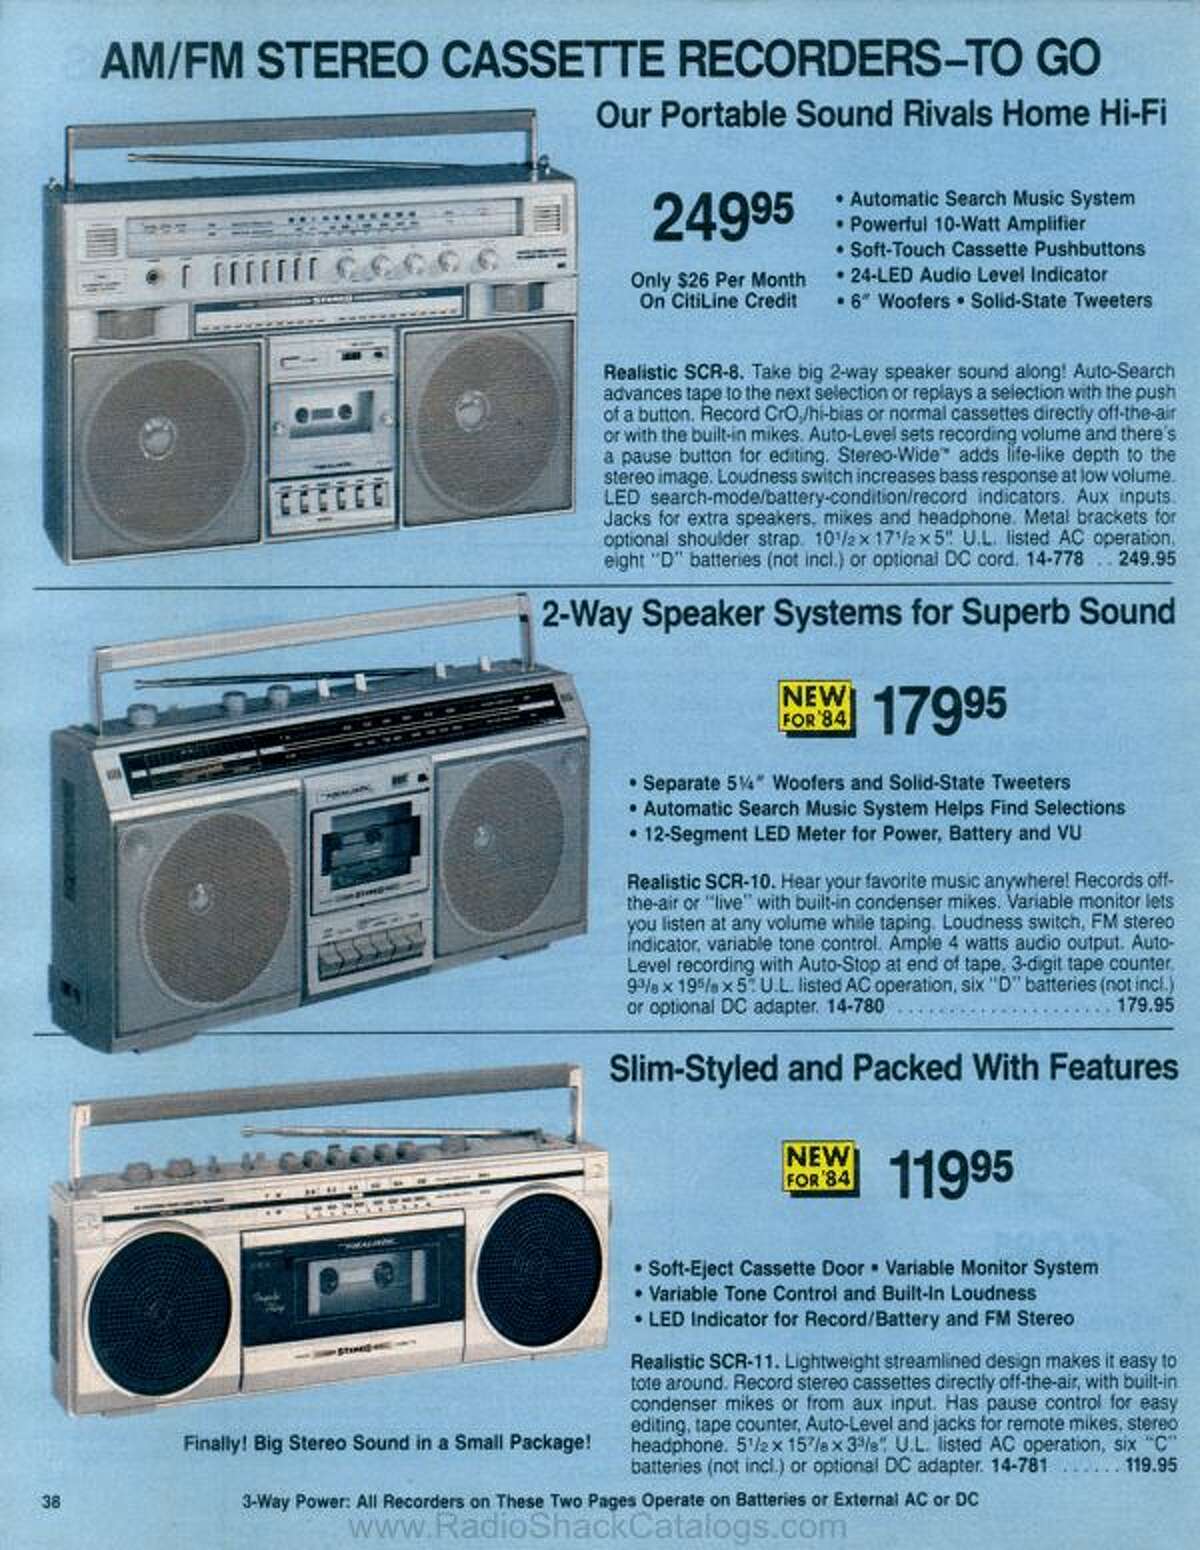 Hottest RadioShack tech gifts of 1984 holiday season laughable now